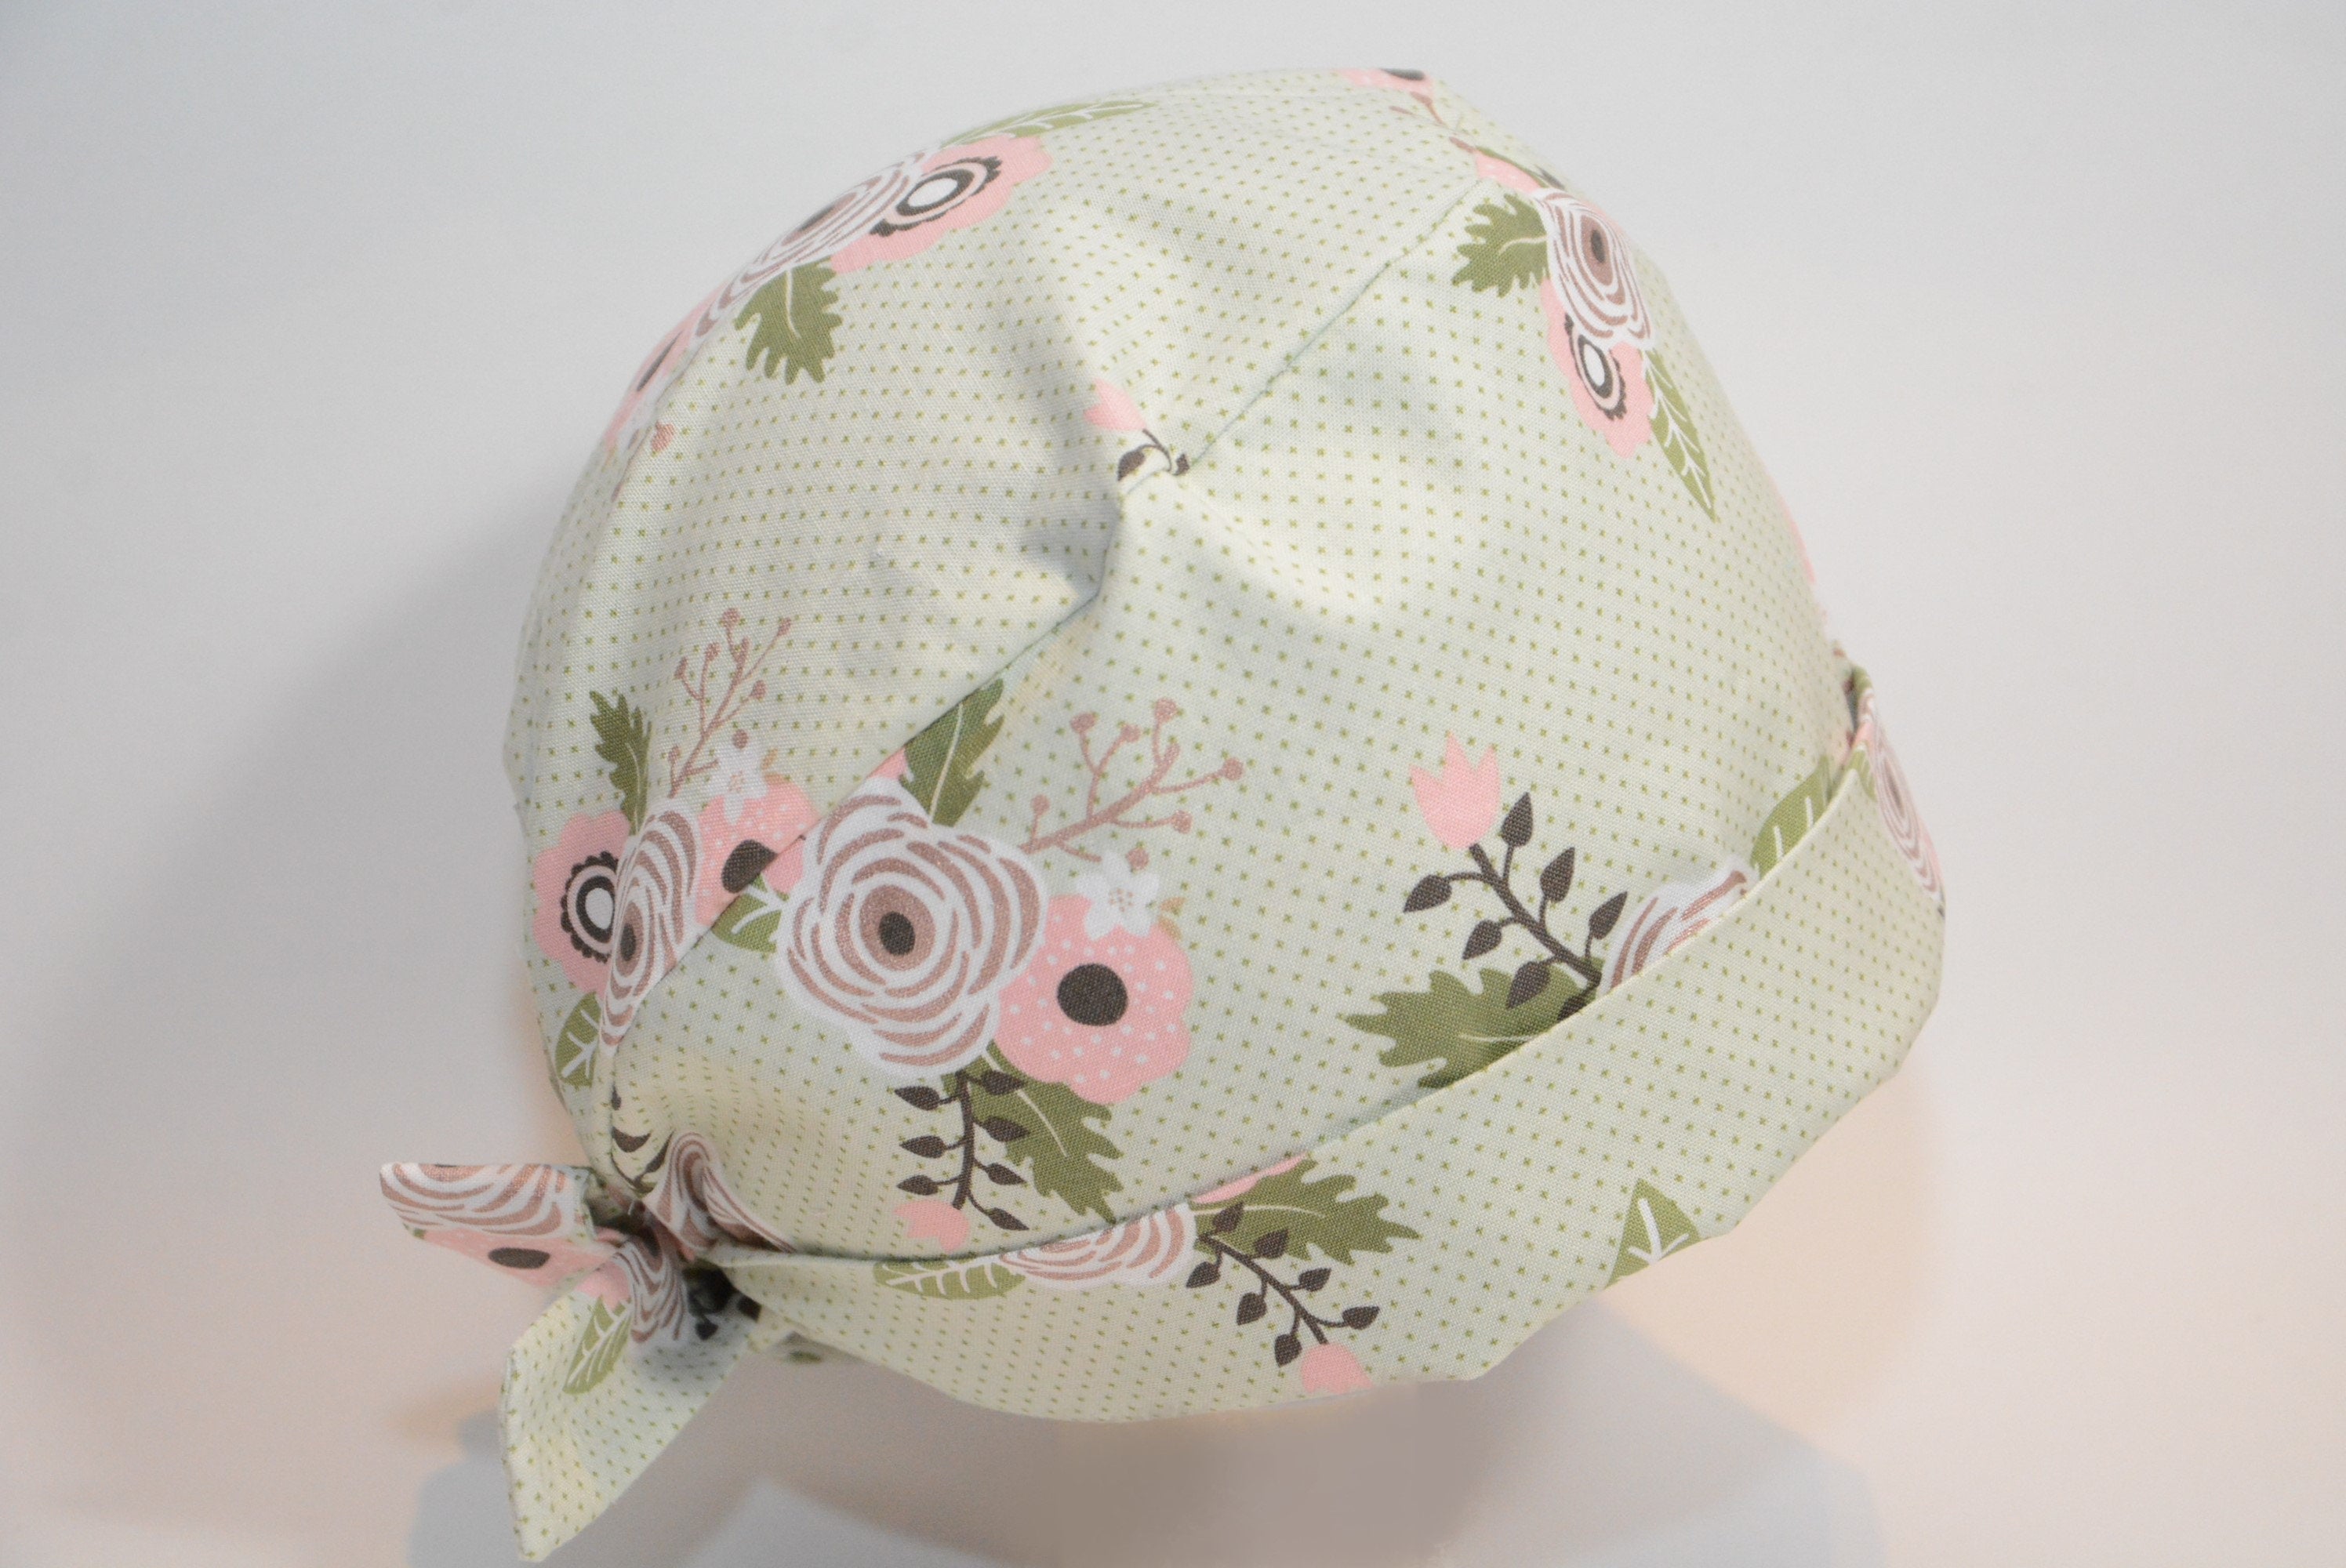 Roses on Pastel Green with Polka Dots - Rose Gold Metallic Print